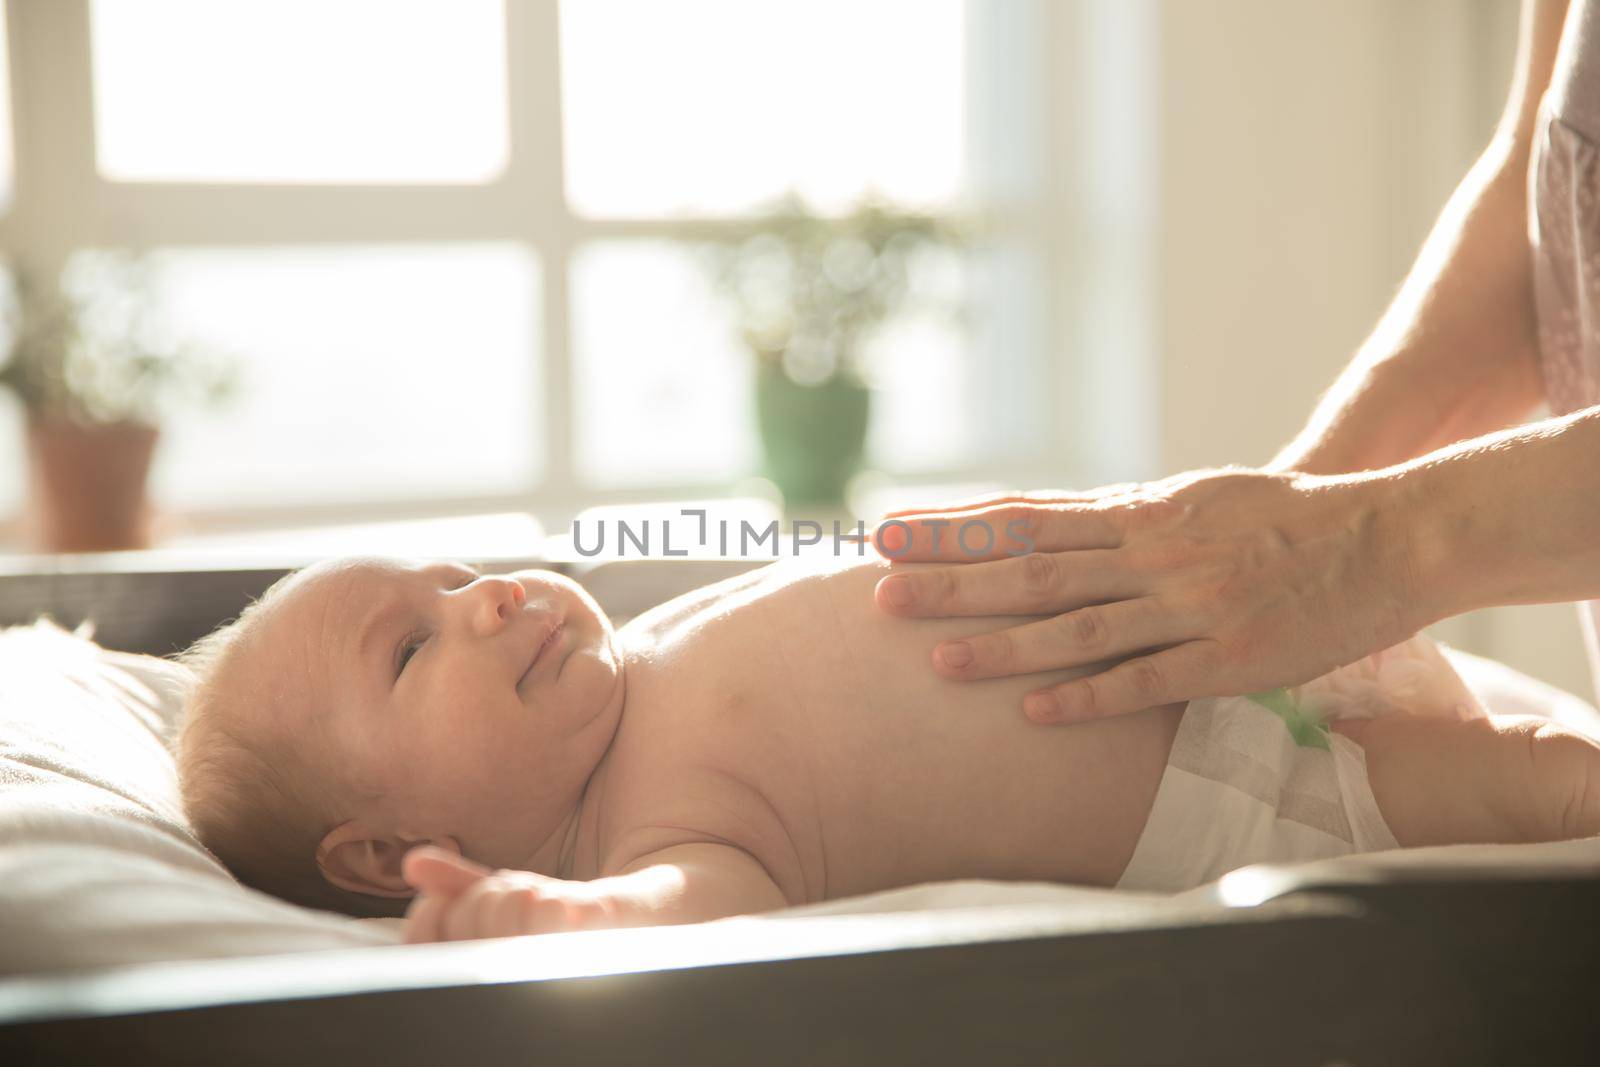 Mother with her hands on her smiling baby lying on a bed. Mid shot